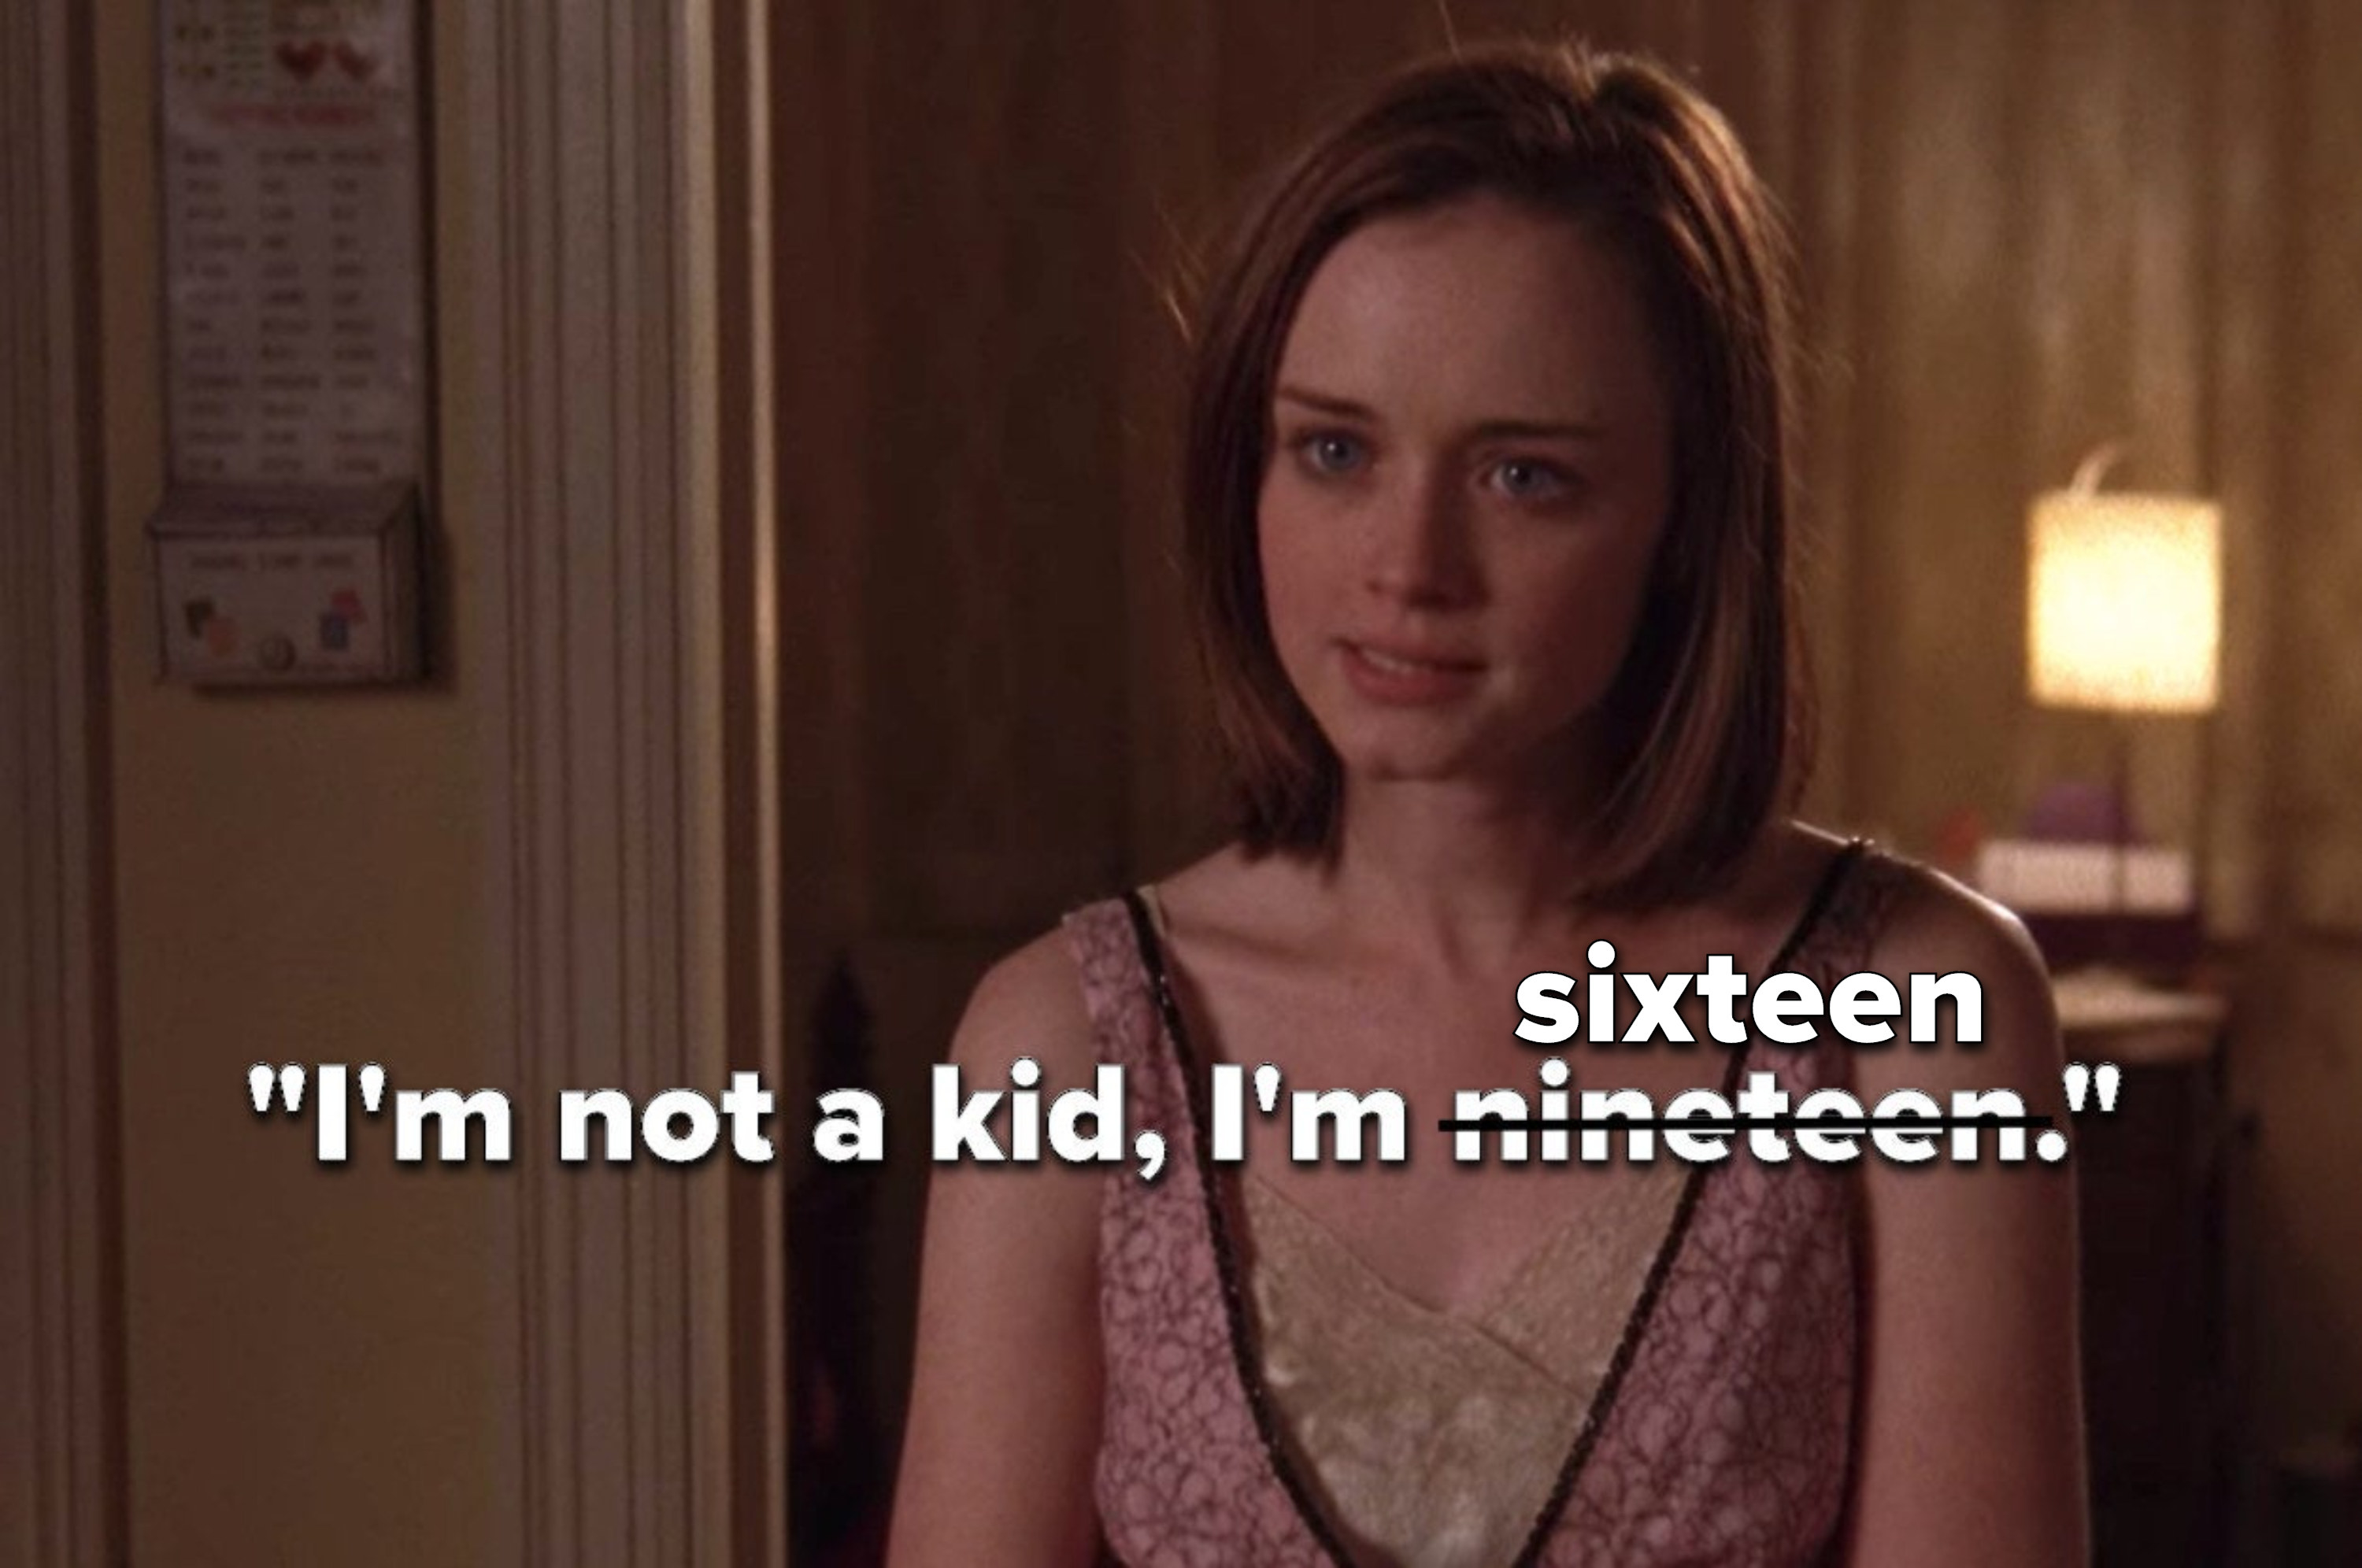 Rory from &quot;Gilmore Girls&quot; saying, &quot;I&#x27;m not a kid, I&#x27;m nineteen,&quot; crossed out to say, &quot;I&#x27;m not a kid, I&#x27;m sixteen&quot;